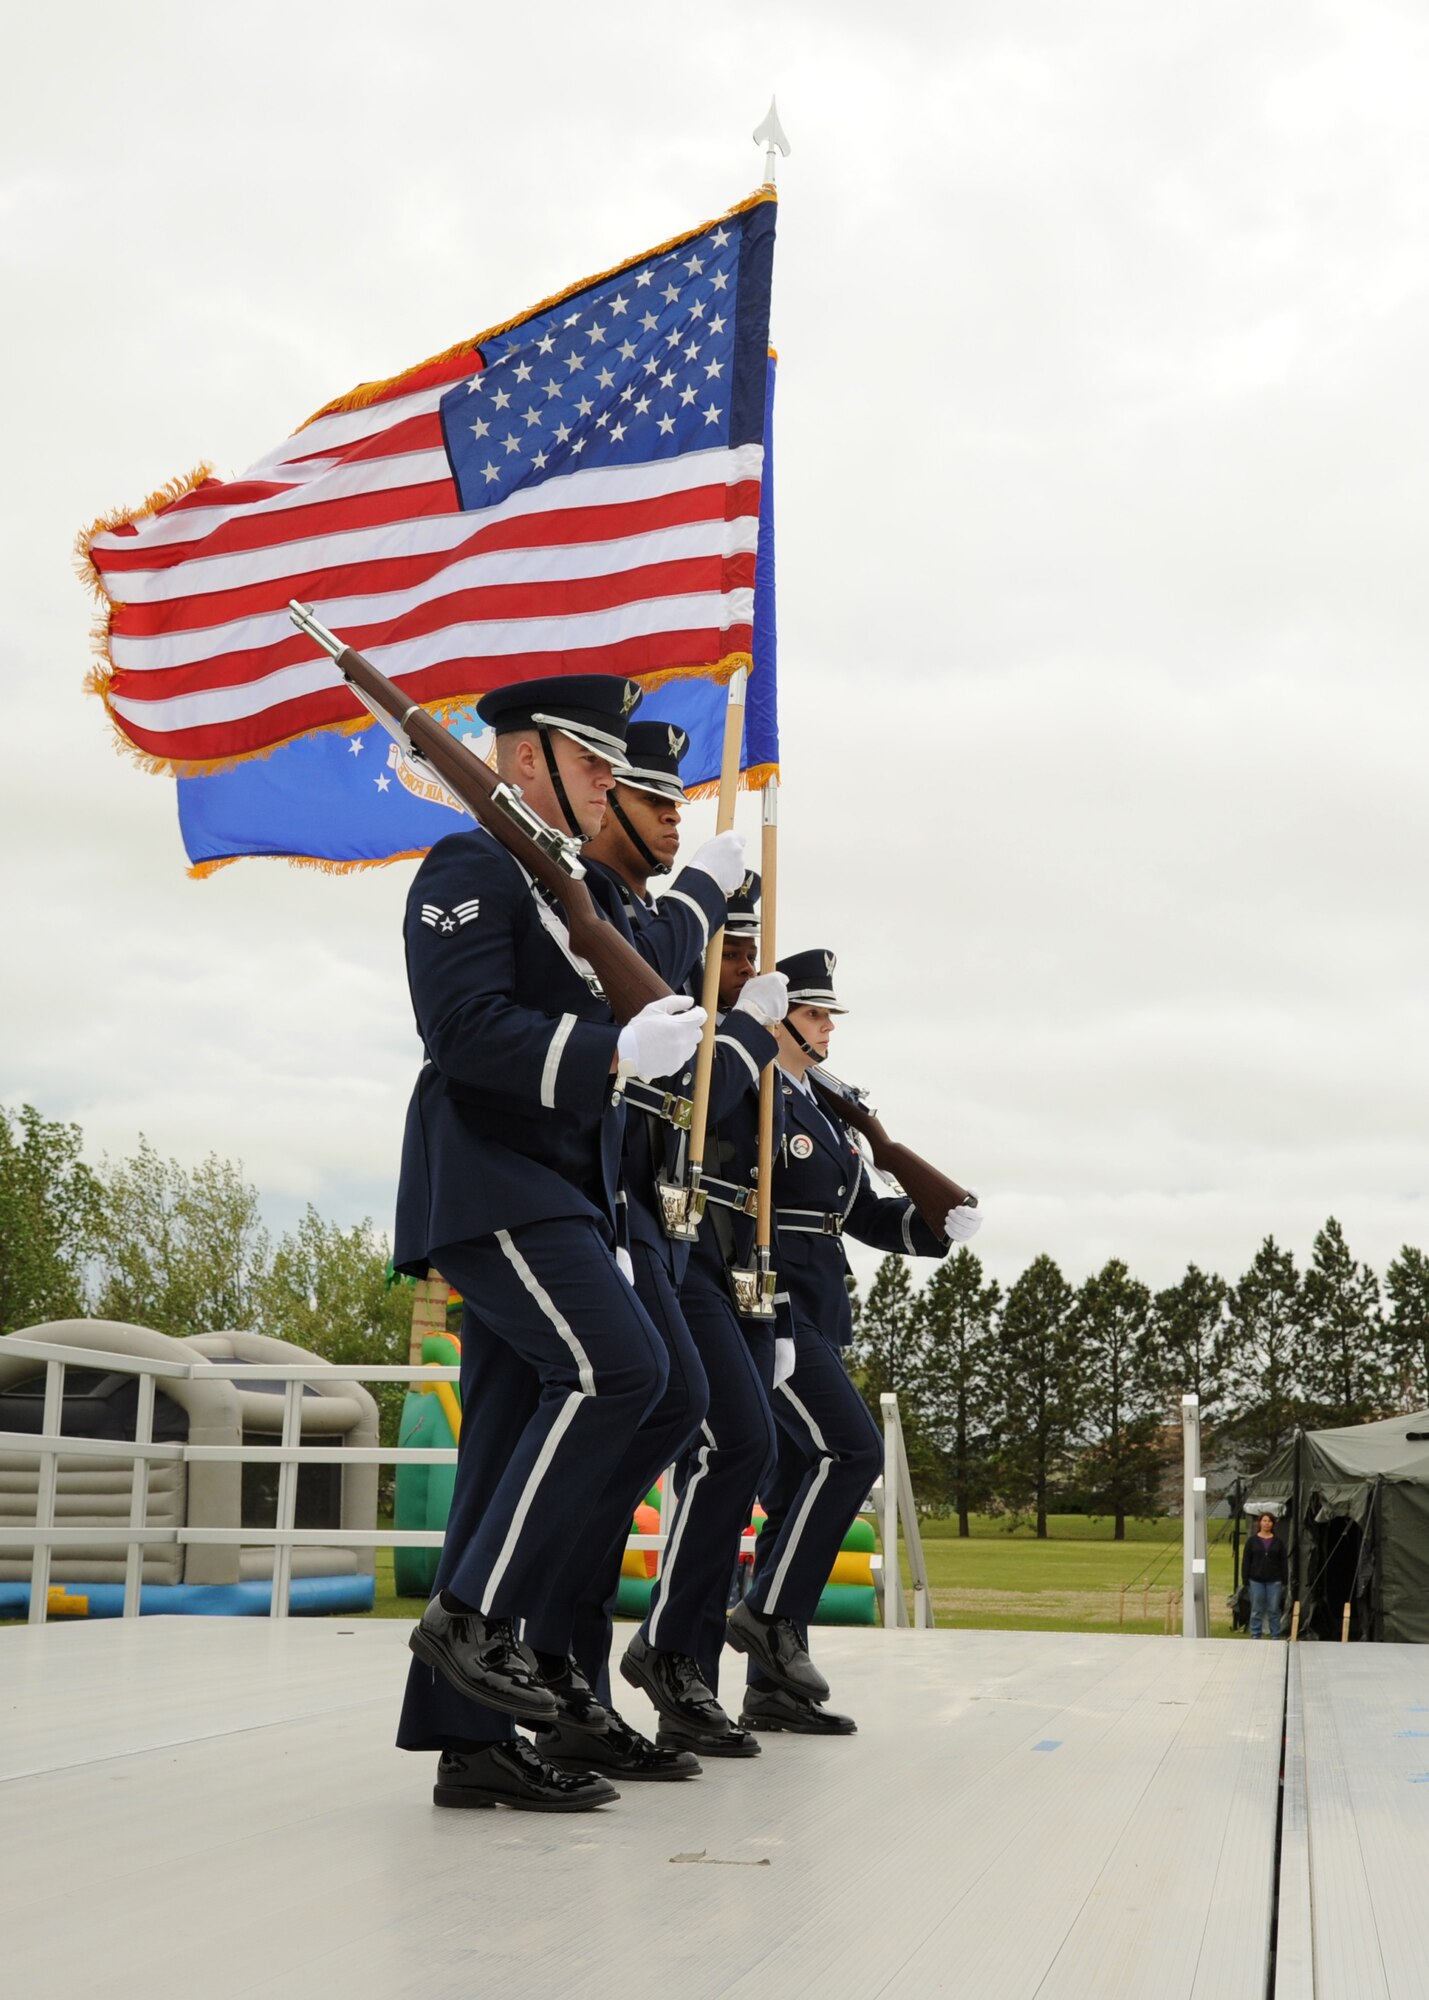 The 319th Air Base Wing Honor Guard presents the colors June 11, 2016, on Cavalier Air Force Station, N.D. The presentation of the colors marked the official beginning of the Cavalier AFS Open House. (U.S. Air Force photo by Senior Airman Ryan Sparks/Released)